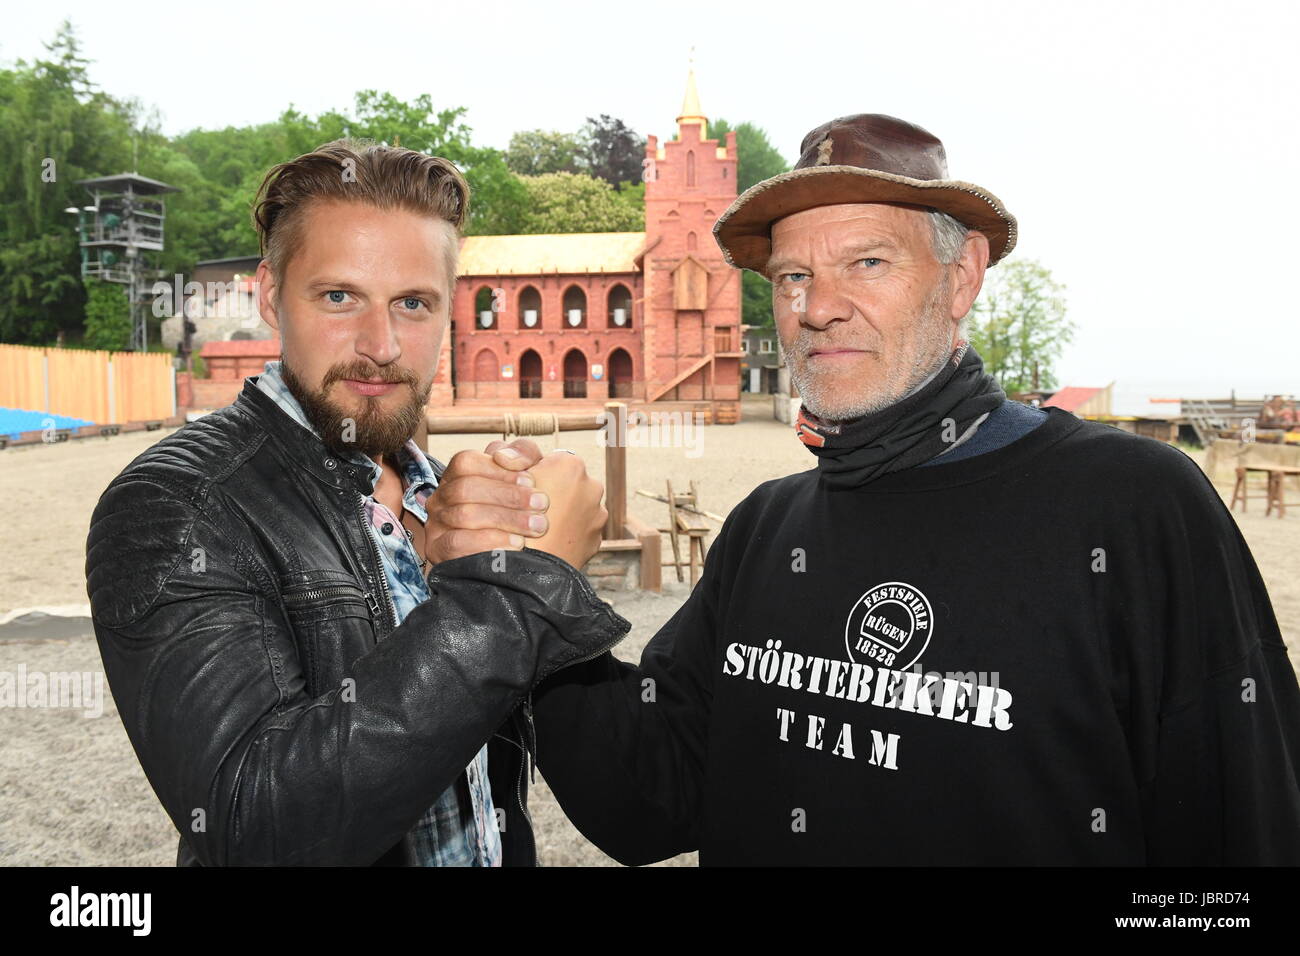 The actor of the pirate Klaus Stoertebeker, Bastian Semm (L), stands with the former actor of Stoertebeker (1993 - 2001) Norbert Braun, at the Nature Stage Ralswiek, Germany, 30 May 2017. The Stoertebeker Festival has been taking place for 25 years on the island of Ruegen. Photo: Stefan Sauer/dpa-Zentralbild/dpa Stock Photo